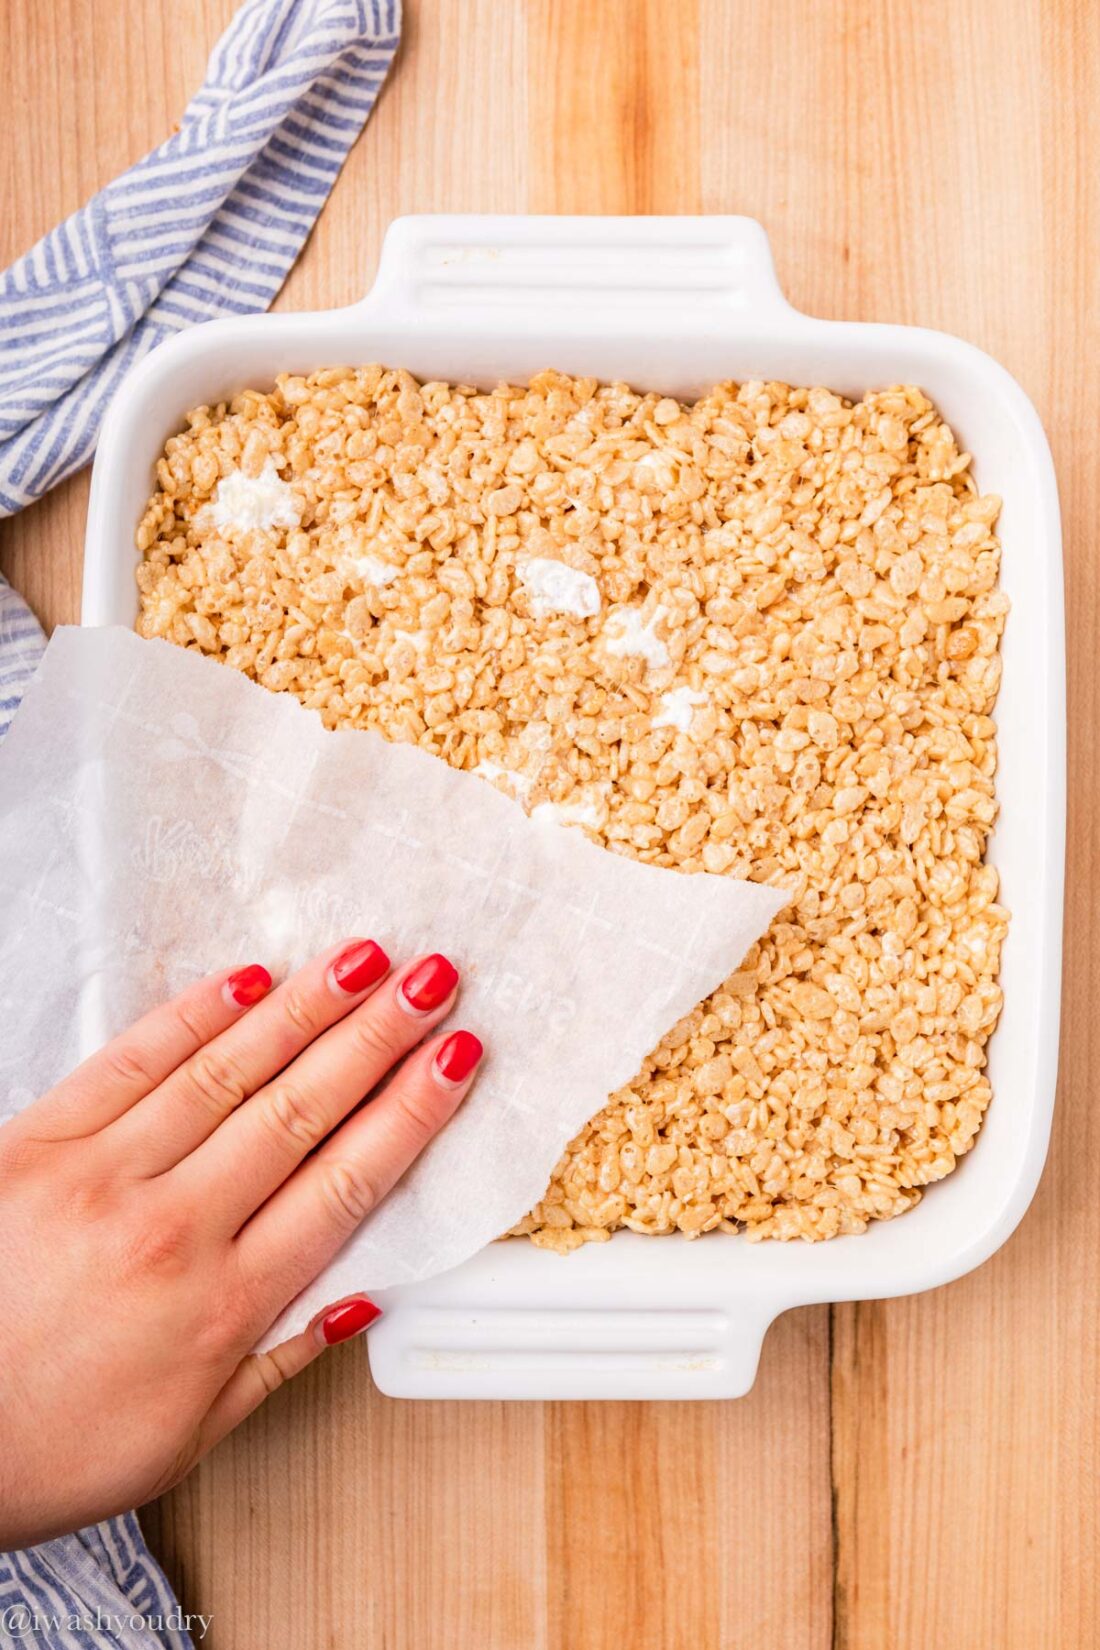 press cereal treats into pan with parchment paper.